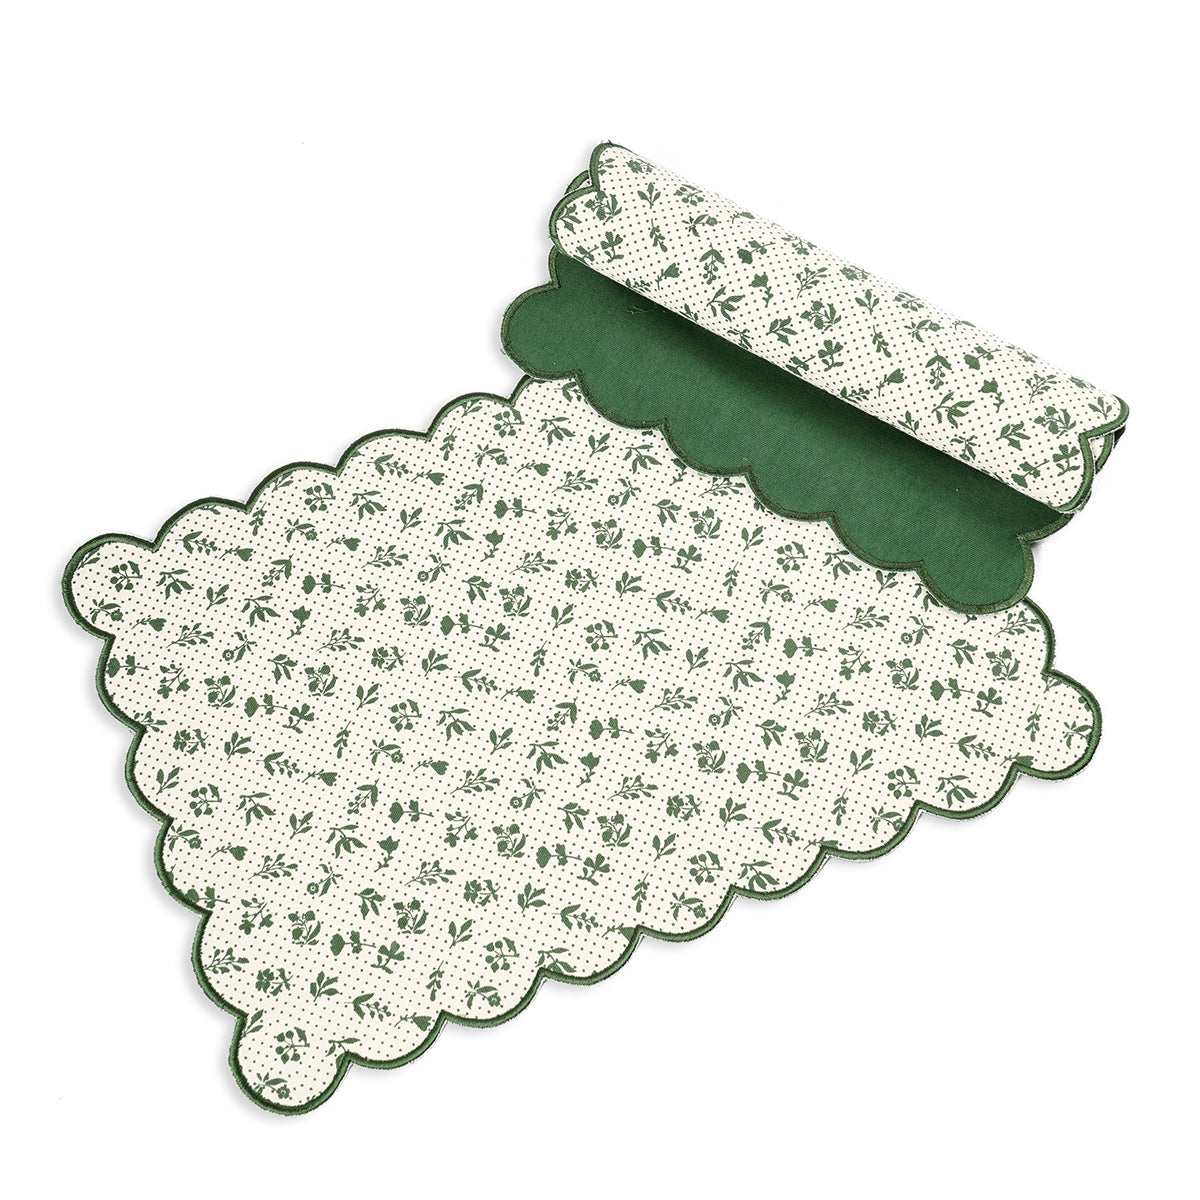 Green scalloped cotton Placemat with floral block print , 13X19 inches